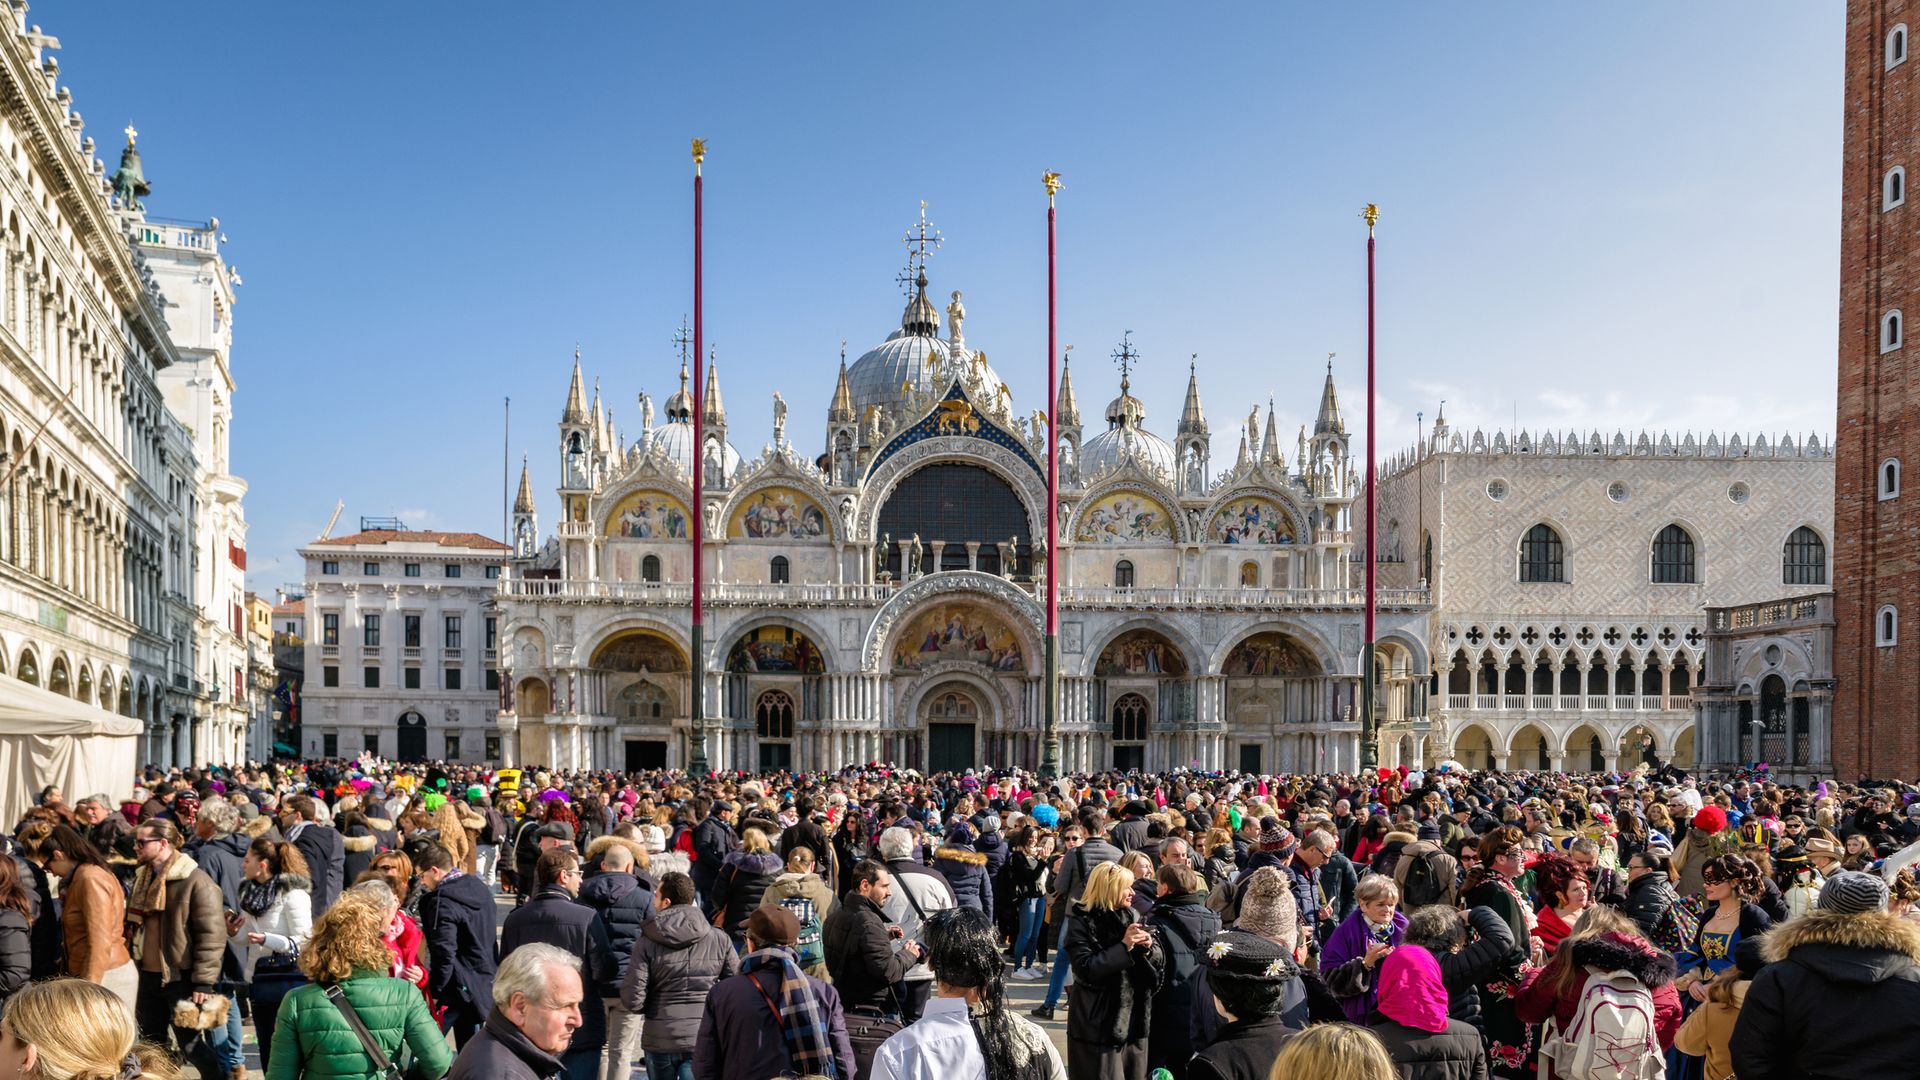 Anger as overcrowded Venice begins charging visitors to enter city from today